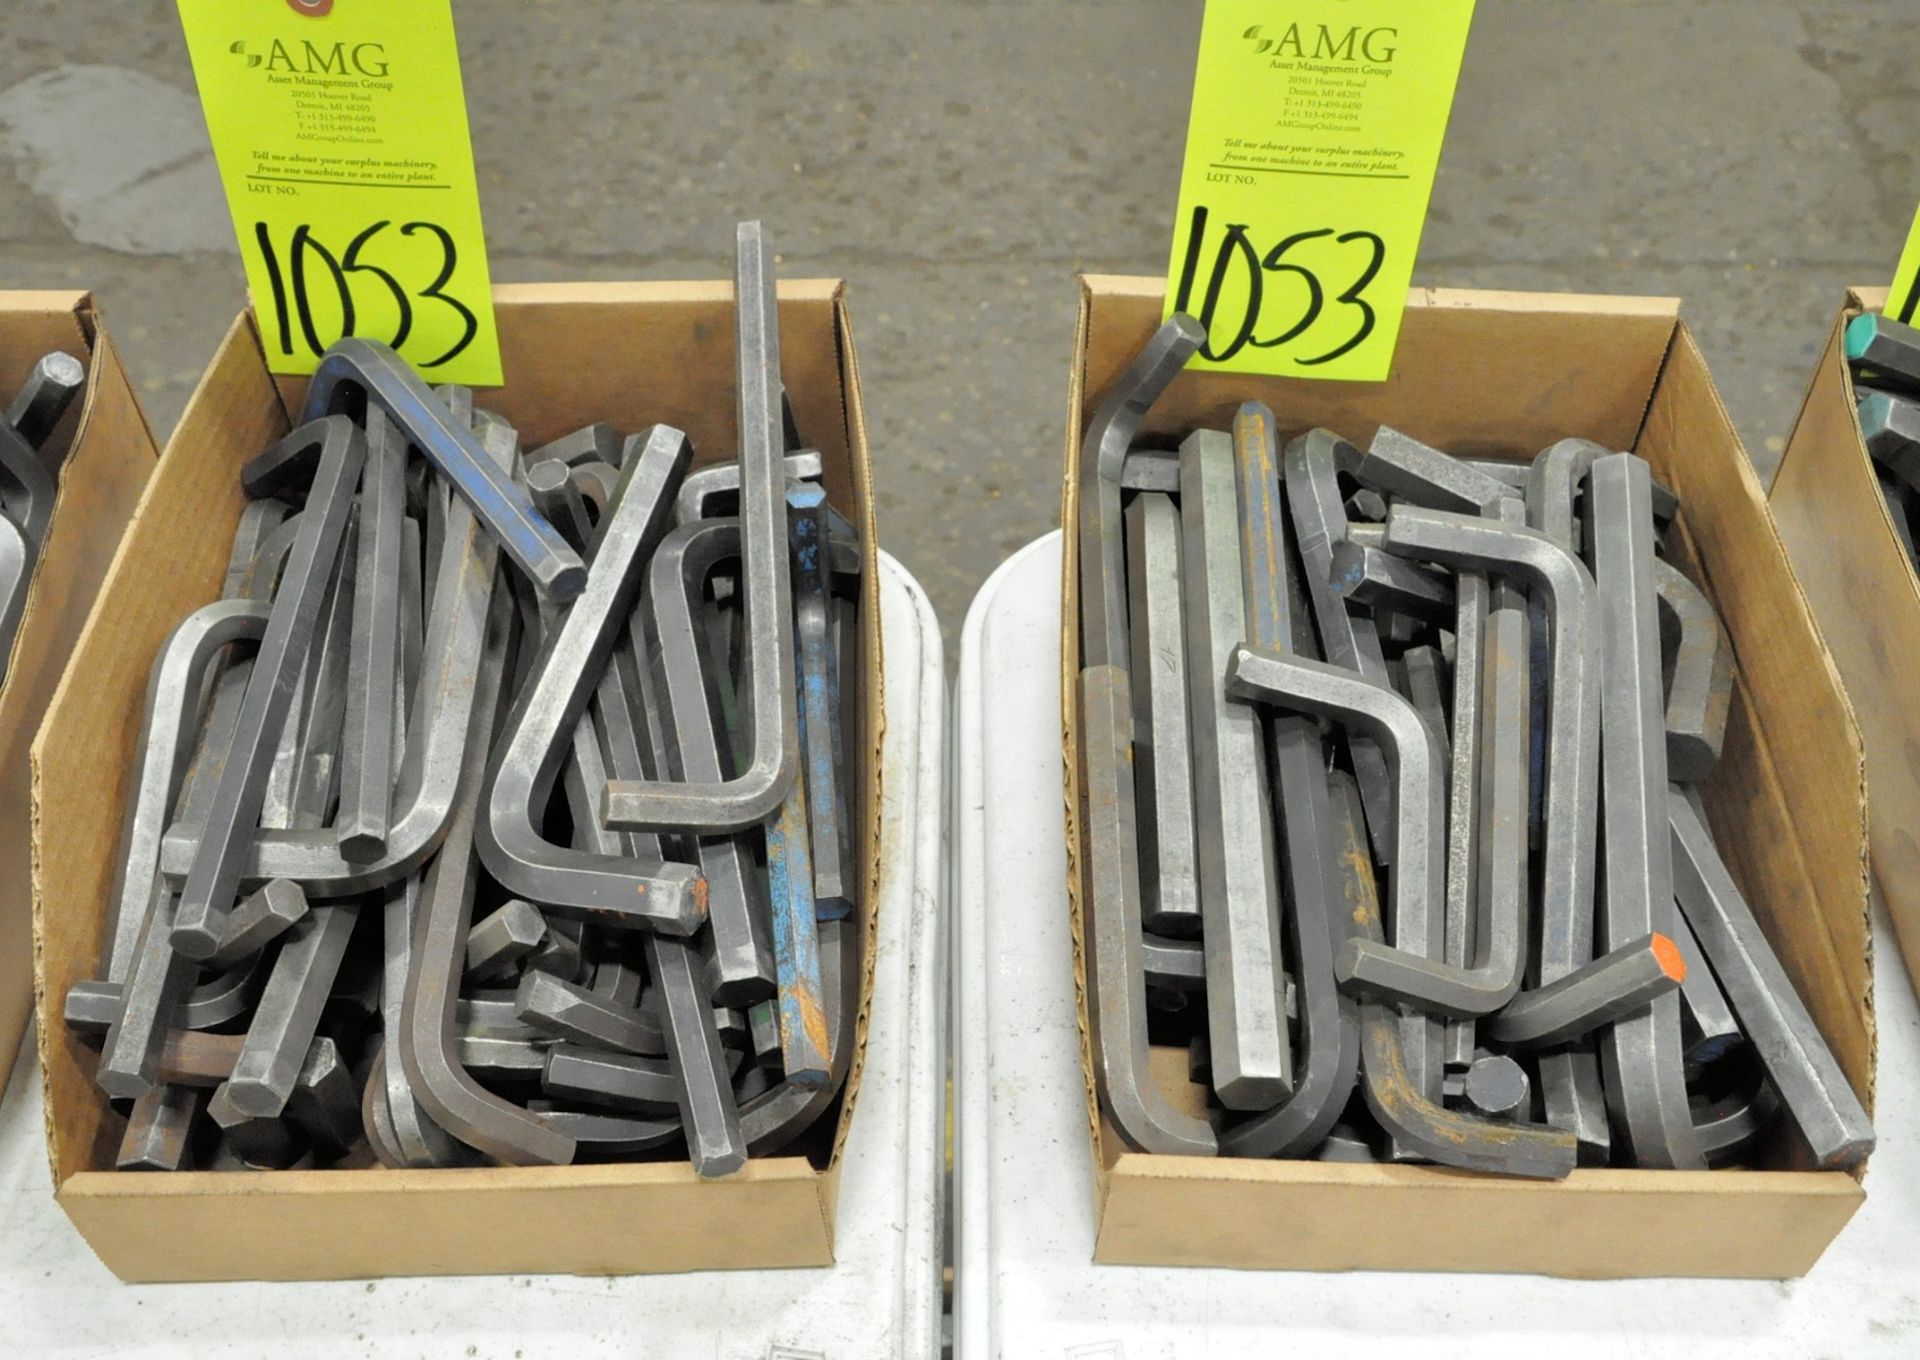 Lot-Asst'd Allen Wrenches in (4) Boxes, (E-7), (Yellow Tag) - Image 2 of 2